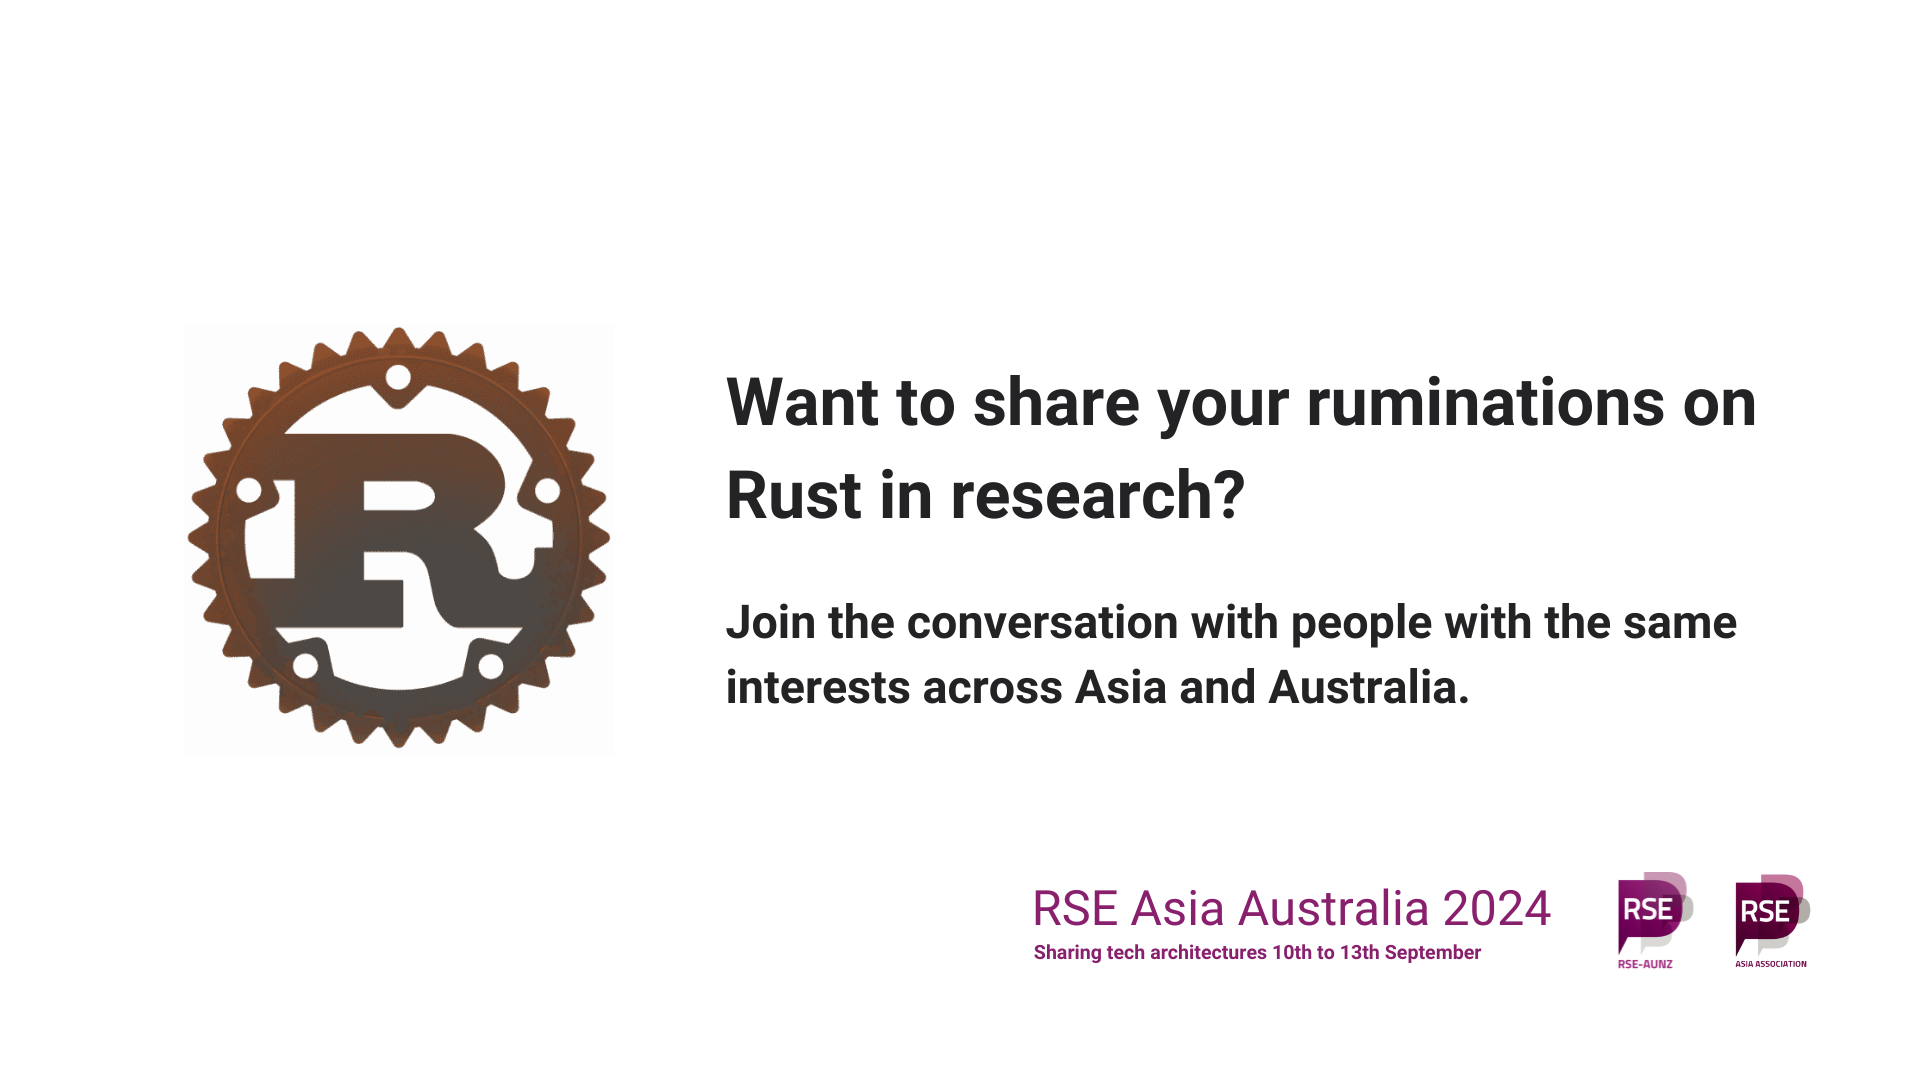 Rust logo. Want to share your ruminations on Rust in research? Join the conversation with people with the same interests across Asia and Australia. RSE Asia Australia 2024. Sharing tech architectures. 10th to 13th September. Logos of RSE AUNZ and RSE Asia.